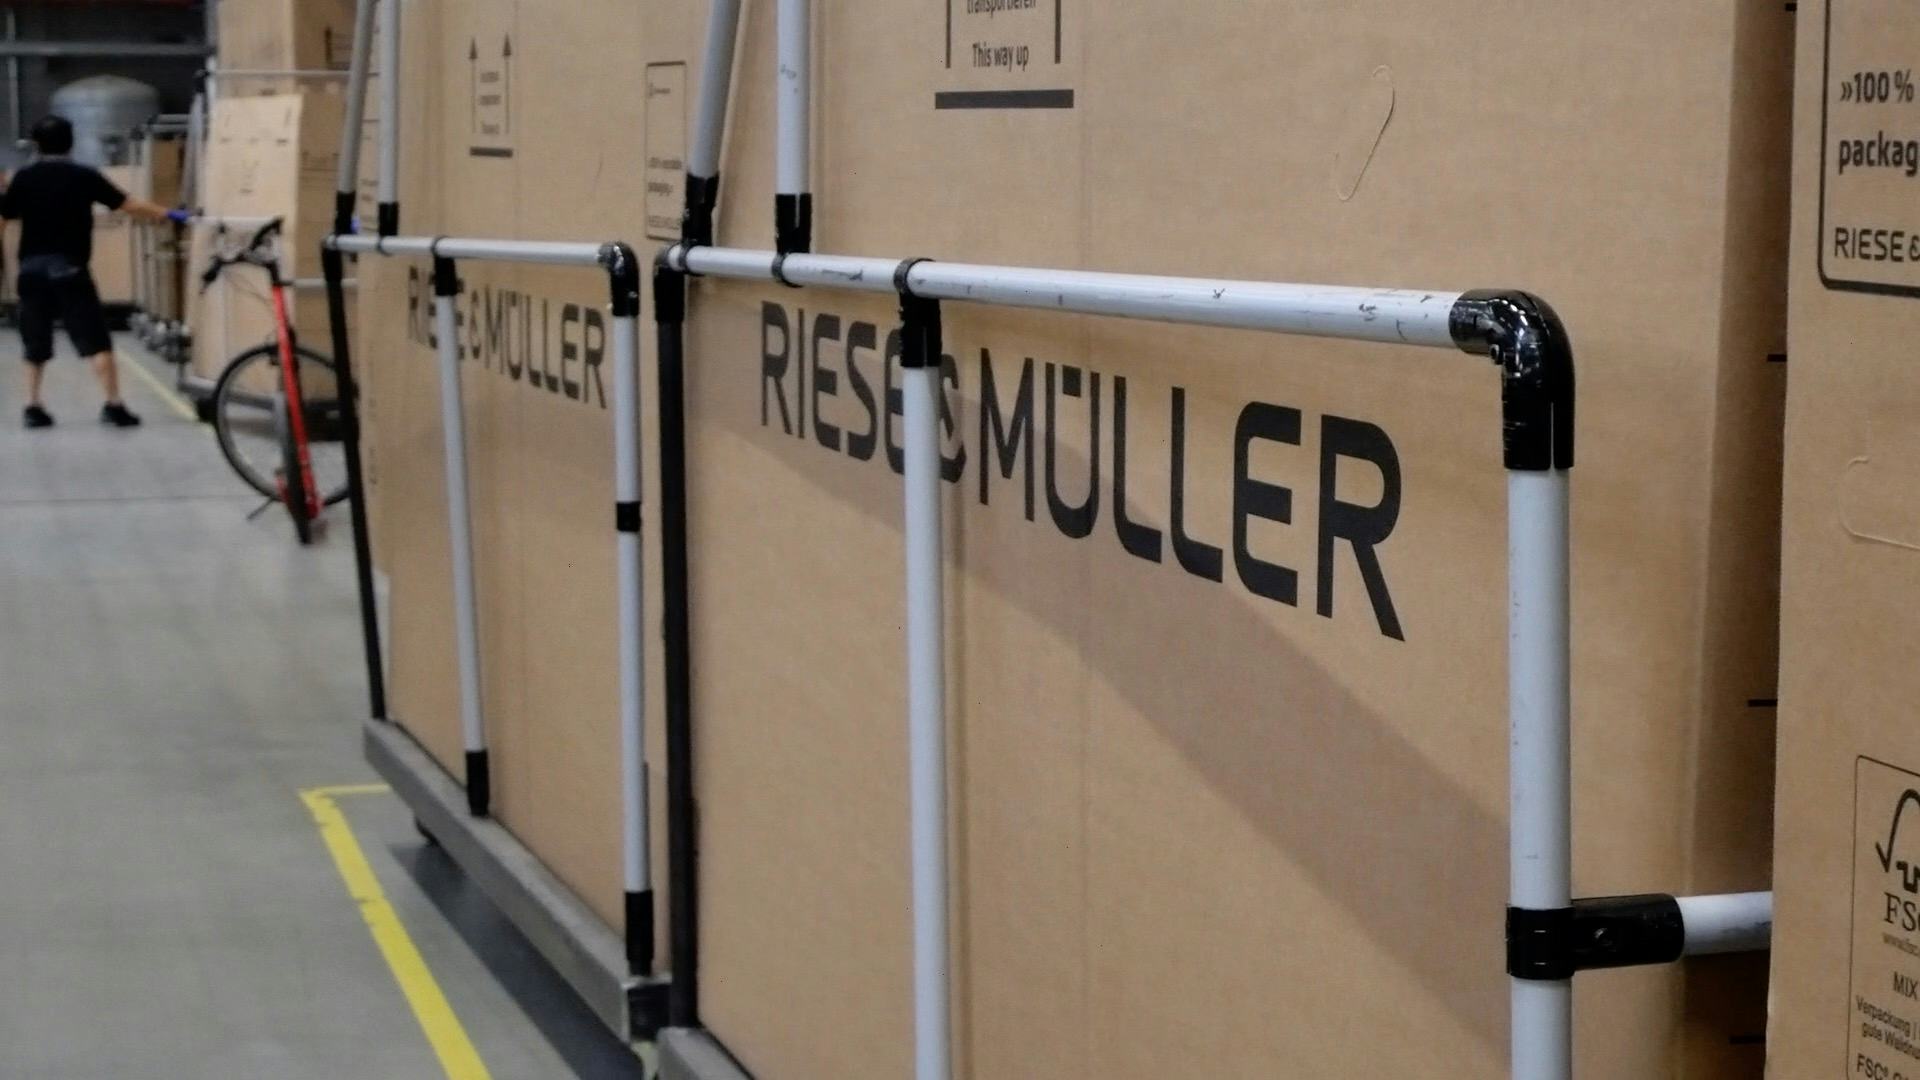 Riese & Müller has been working to reduce waste and further improve its recycling rate – which is already over 90%. – Photo Bike Europe